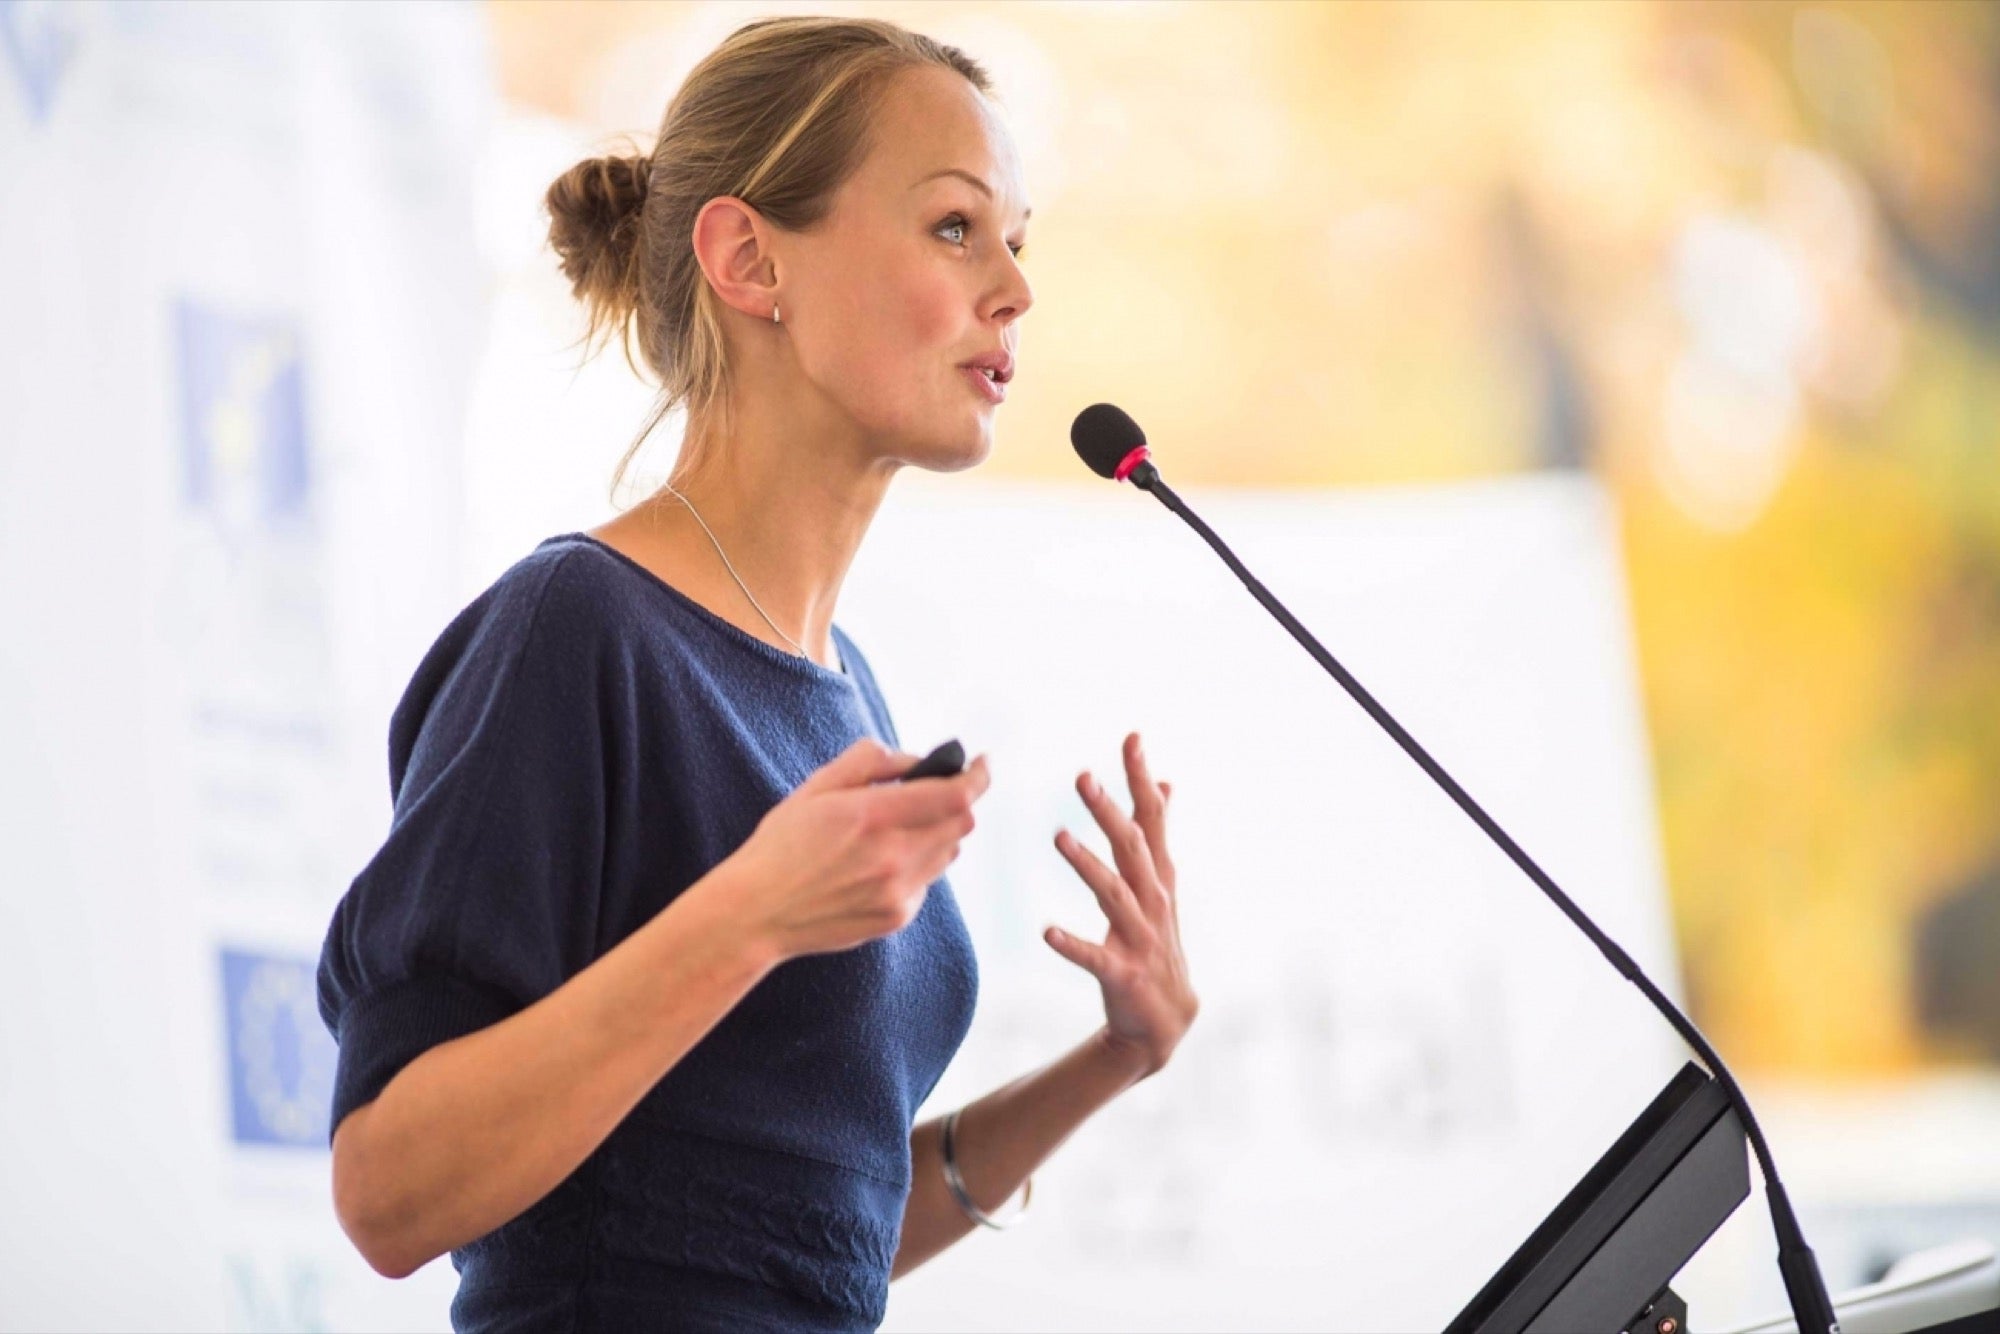 Speak with Confidence: Seven Practical Tips to Enhance Your Public Speaking Abilities